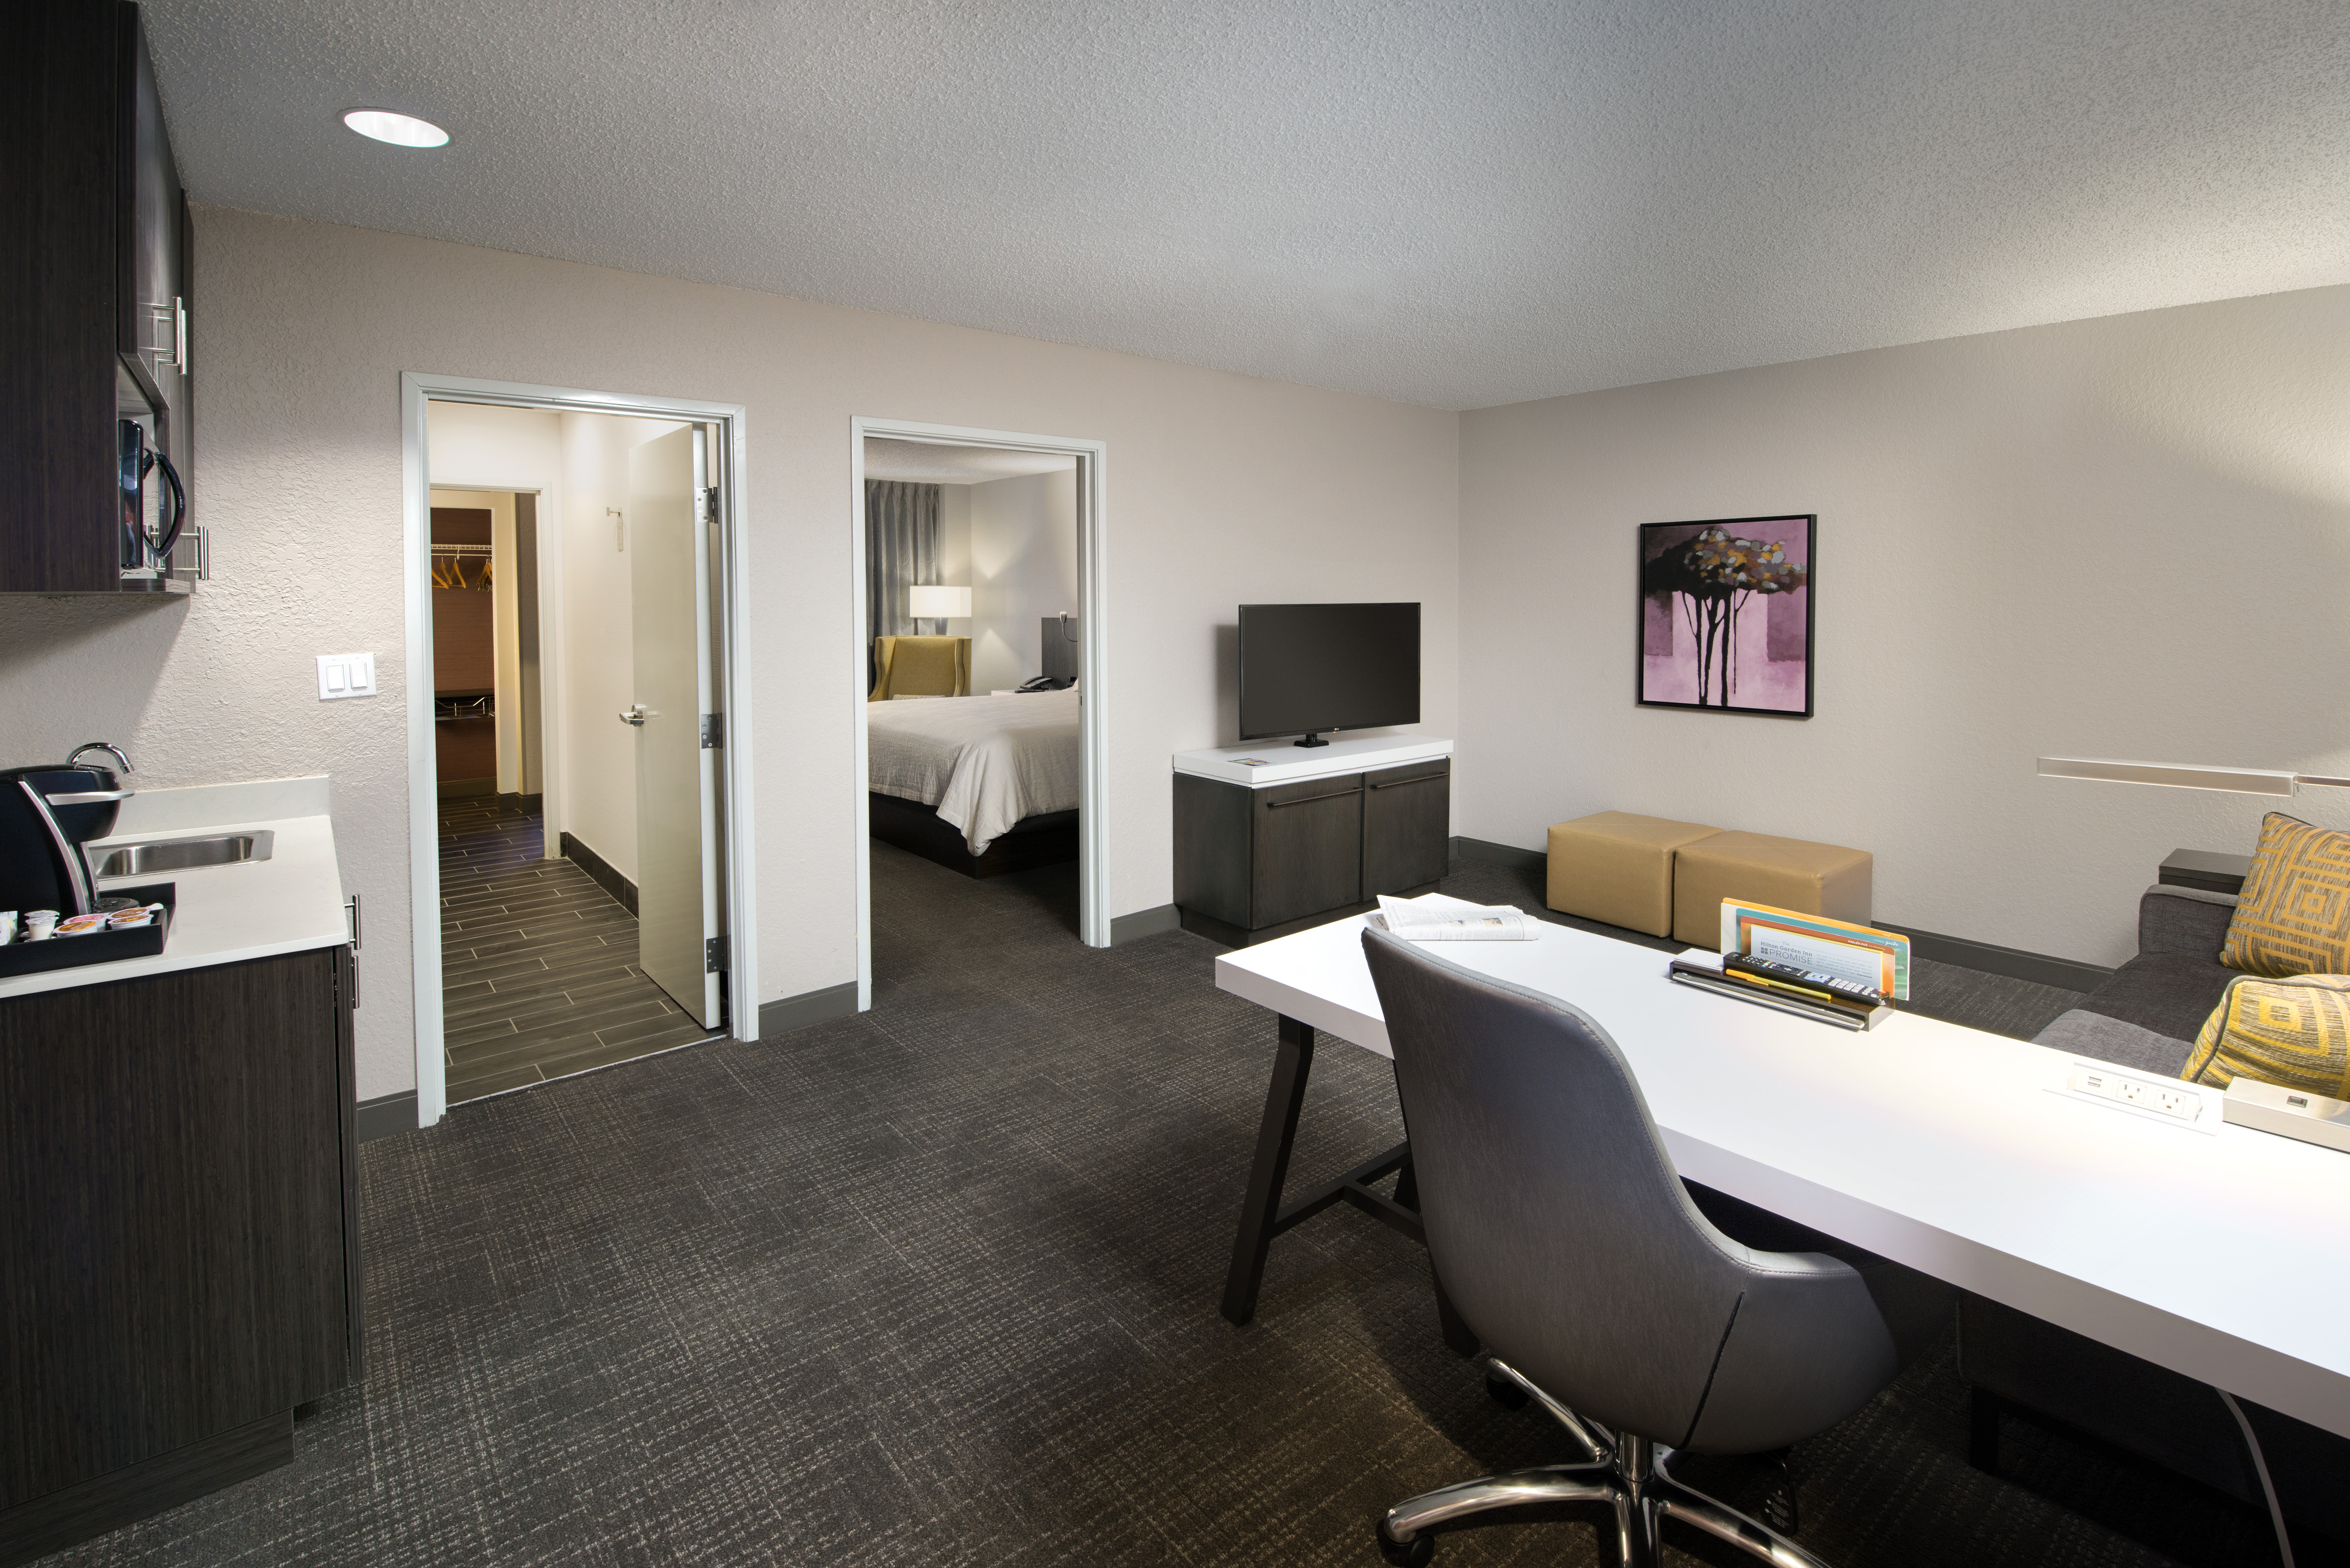 Guest Suite Lounge Area with HDTV, Work Desk, Sofa and Wetbar Area